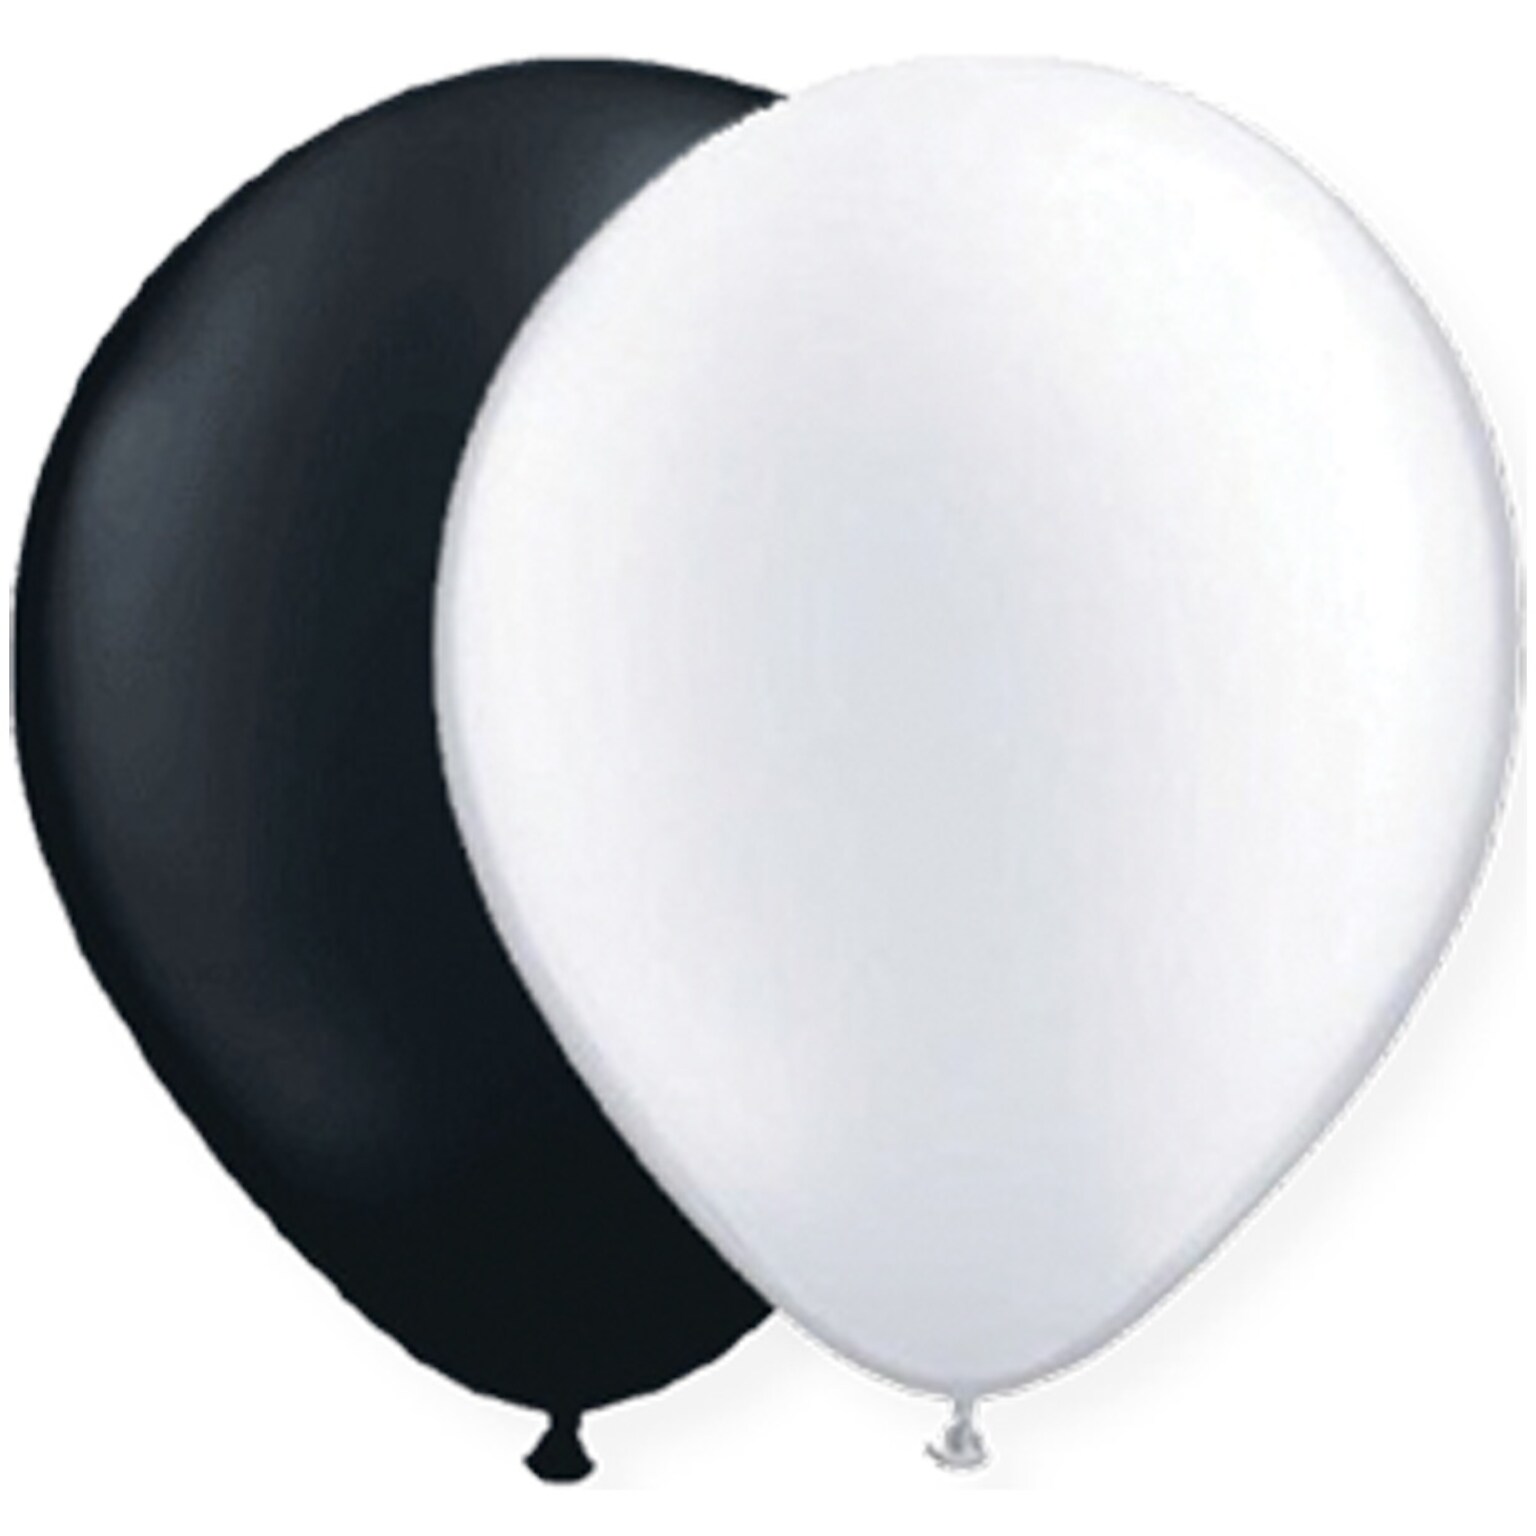 JAM Paper® Party Balloons, 12 Inch Latex Balloons, Black & White Assortment, 12/Pack (377834383A)